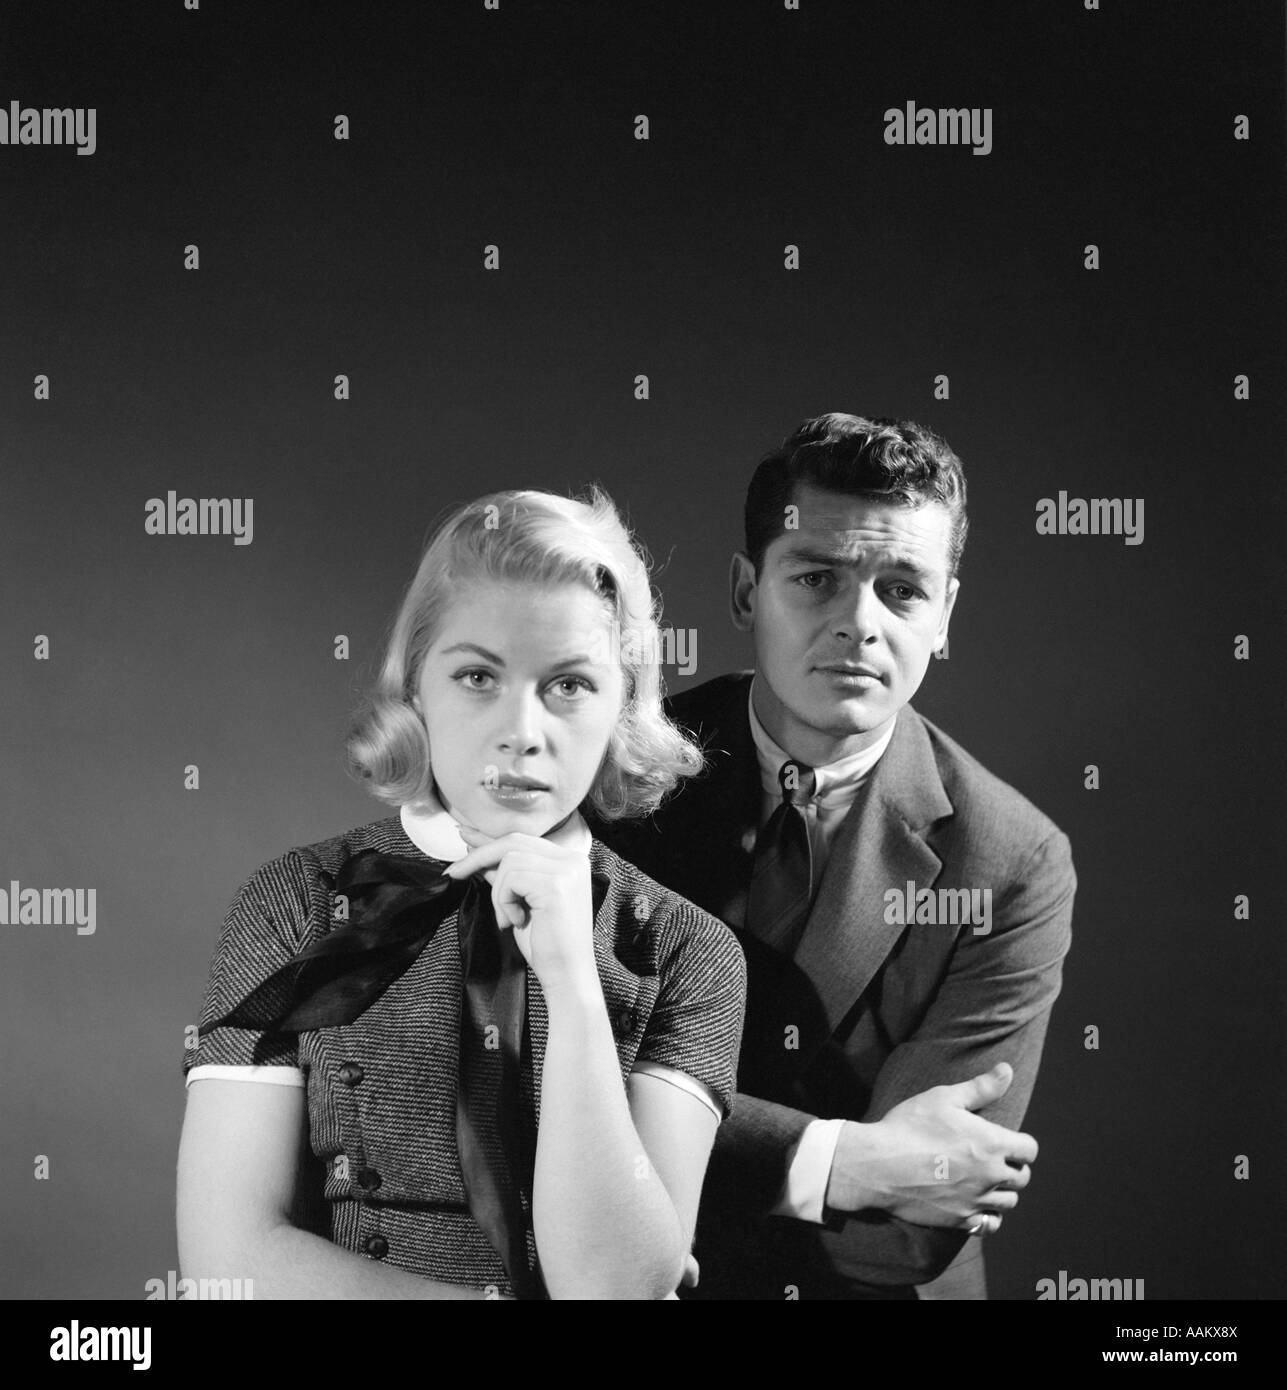 1950s COUPLE MAN BLOND WOMAN WITH SERIOUS PUZZLED EXPRESSIONS PORTRAIT LOOKING AT CAMERA Stock Photo